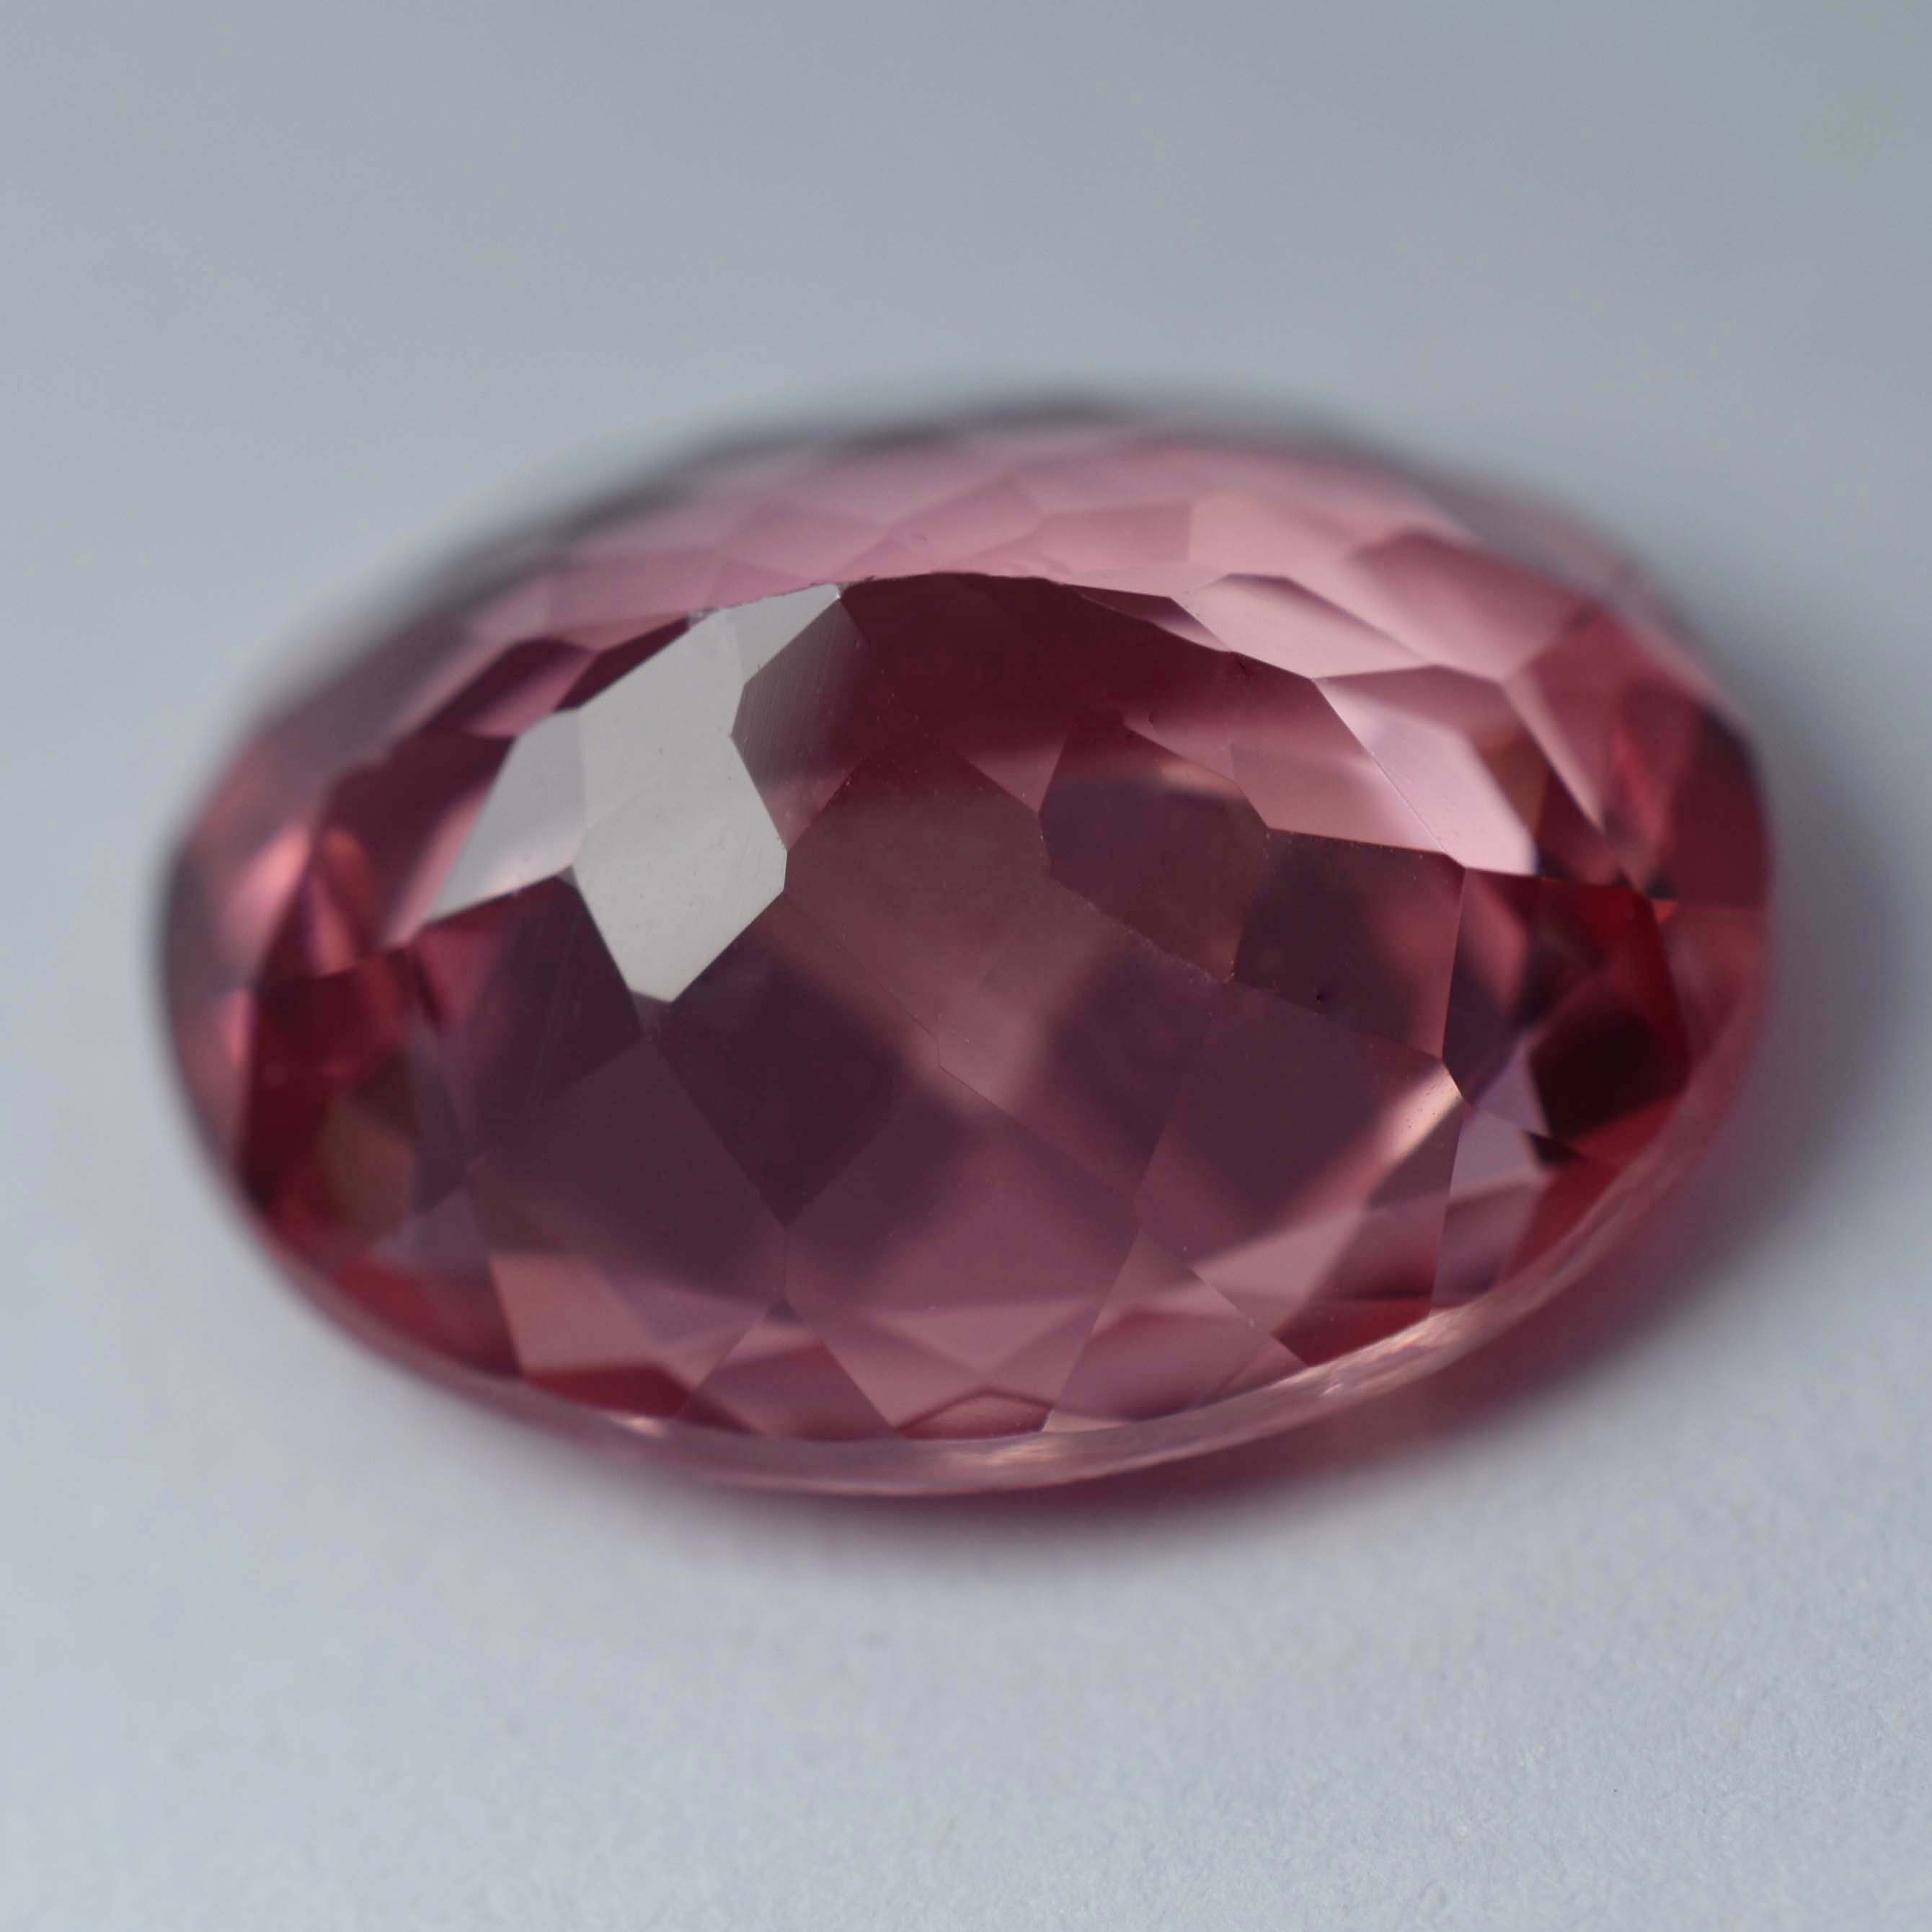 Certified Padparadscha Sapphire 9.65 Carat Oval Shape Natural Loose Gemstone Beautiful Sapphire Gem | Jwelery Making Gem | Sapphire Necklace | Best Price